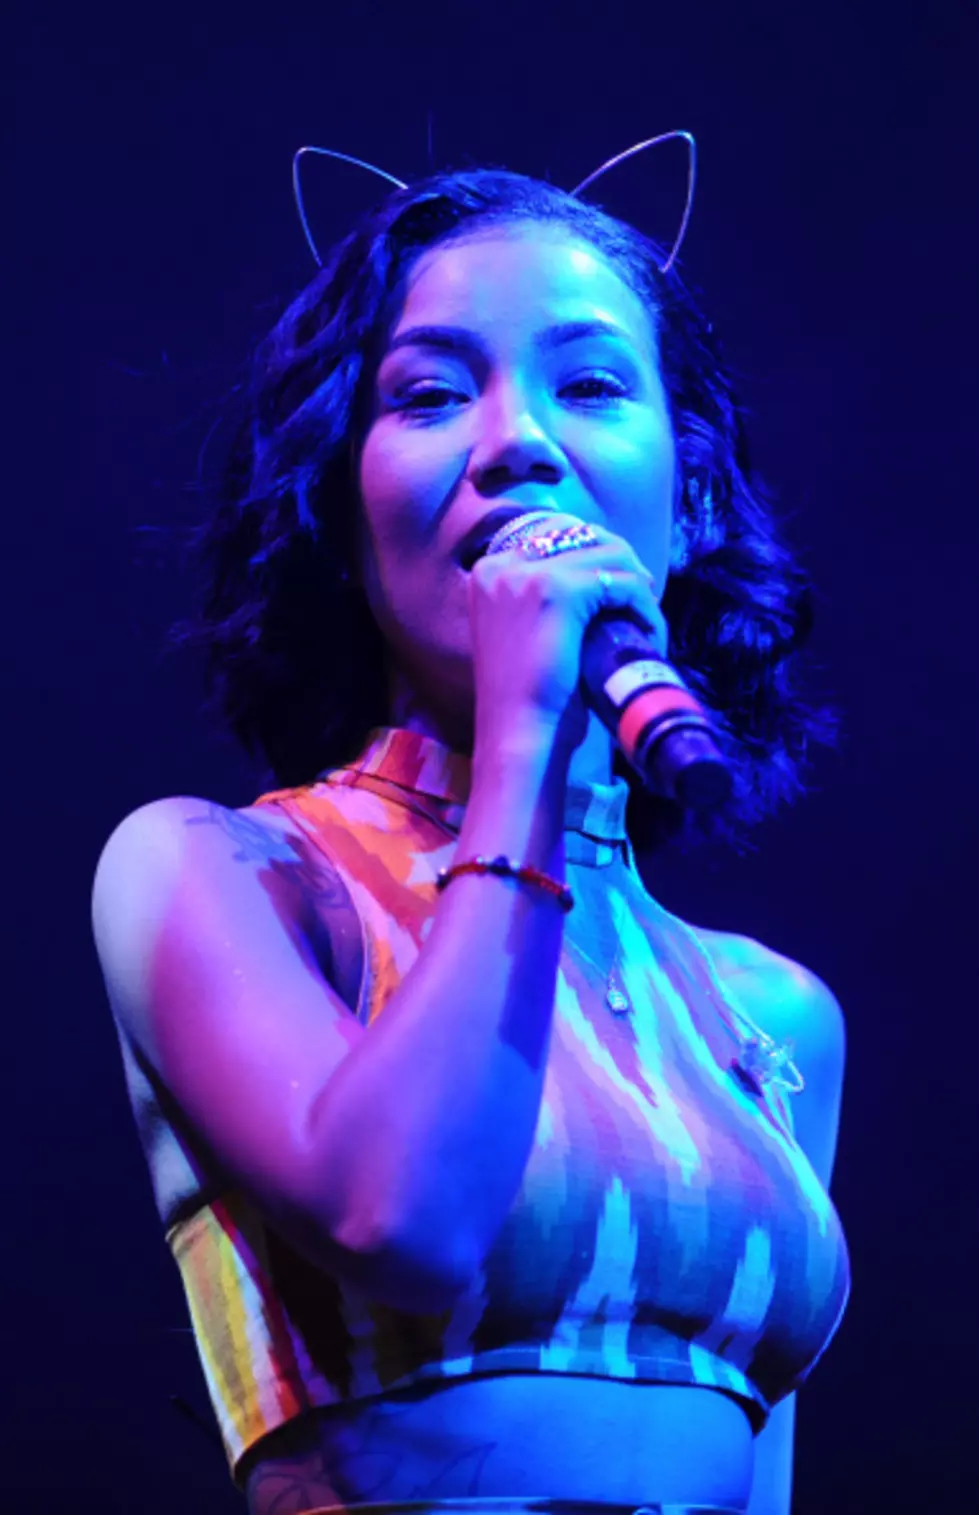 Jhene Aiko &#8220;Souled Out&#8221; Full Album Stream, Listen Here! HOT After Dark with Linda Love